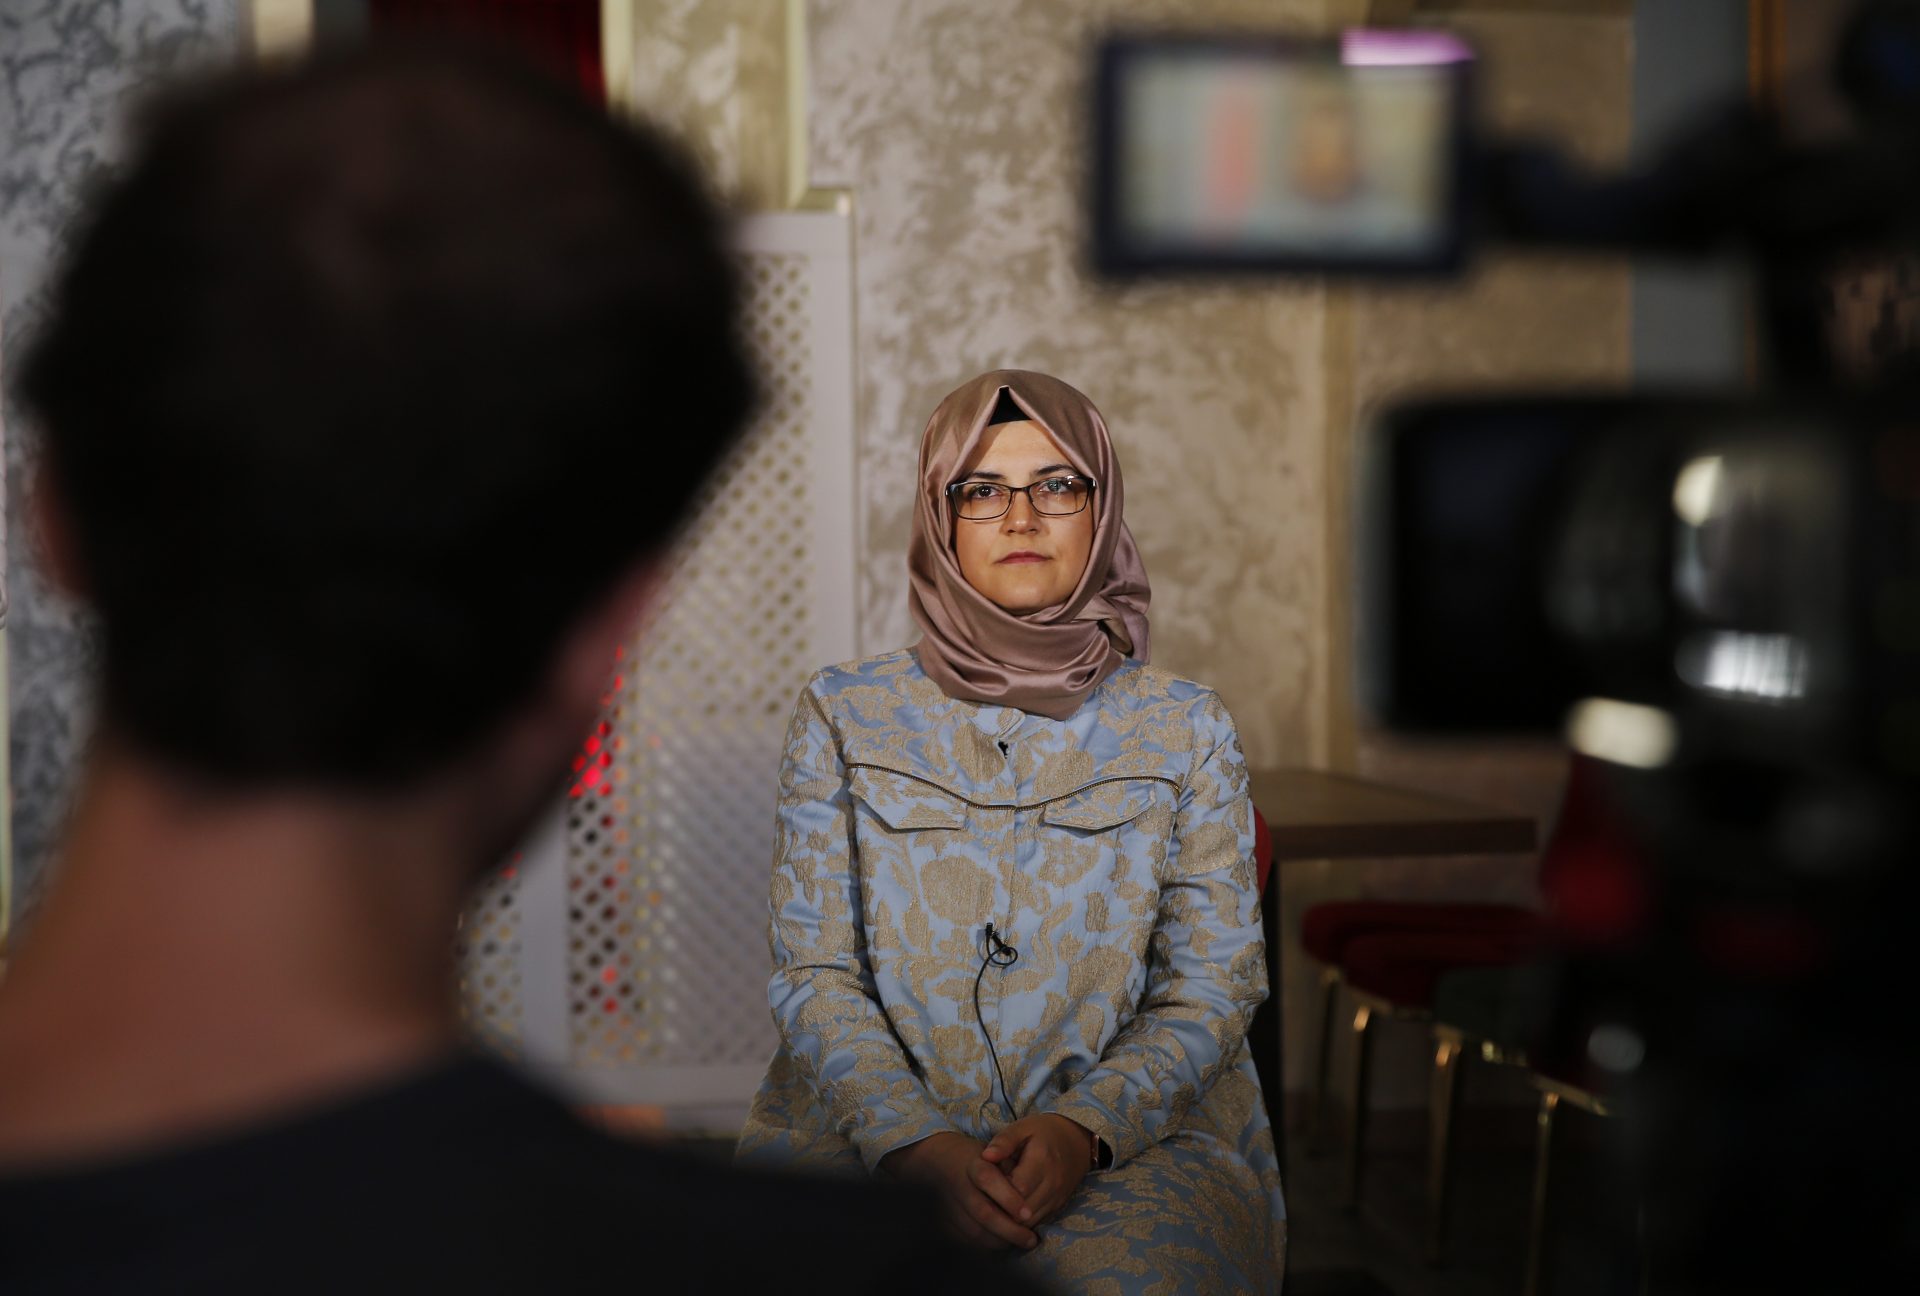 Hatice Cengiz, the fiancee of slain Saudi journalist Jamal Kashoggi talks to The Associated Press in Istanbul, Tuesday, Oct. 1, 2019. Speaking on the eve of the anniversary of his death, Cengiz said she feels apprehensive about returning to the site where he was killed for a commemorative ceremony but takes strength from the fact that she will not be alone. Cengiz said: "Last year, I waited for Jamal alone. This year the whole world will be waiting with me for Jamal, and for justice for Jamal''.